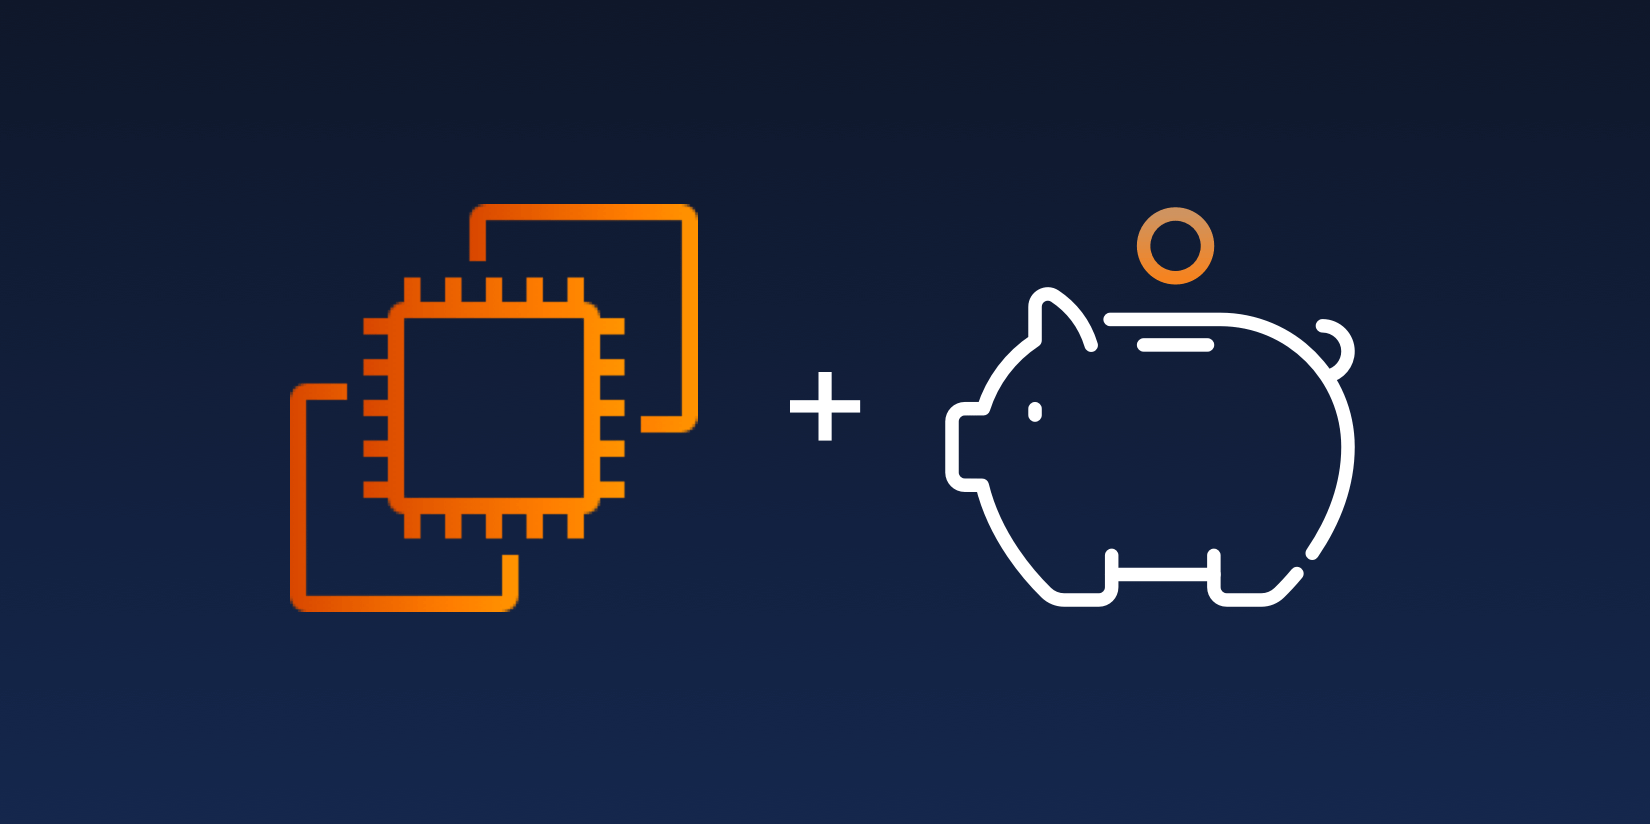 Save on your AWS bill with this one simple trick